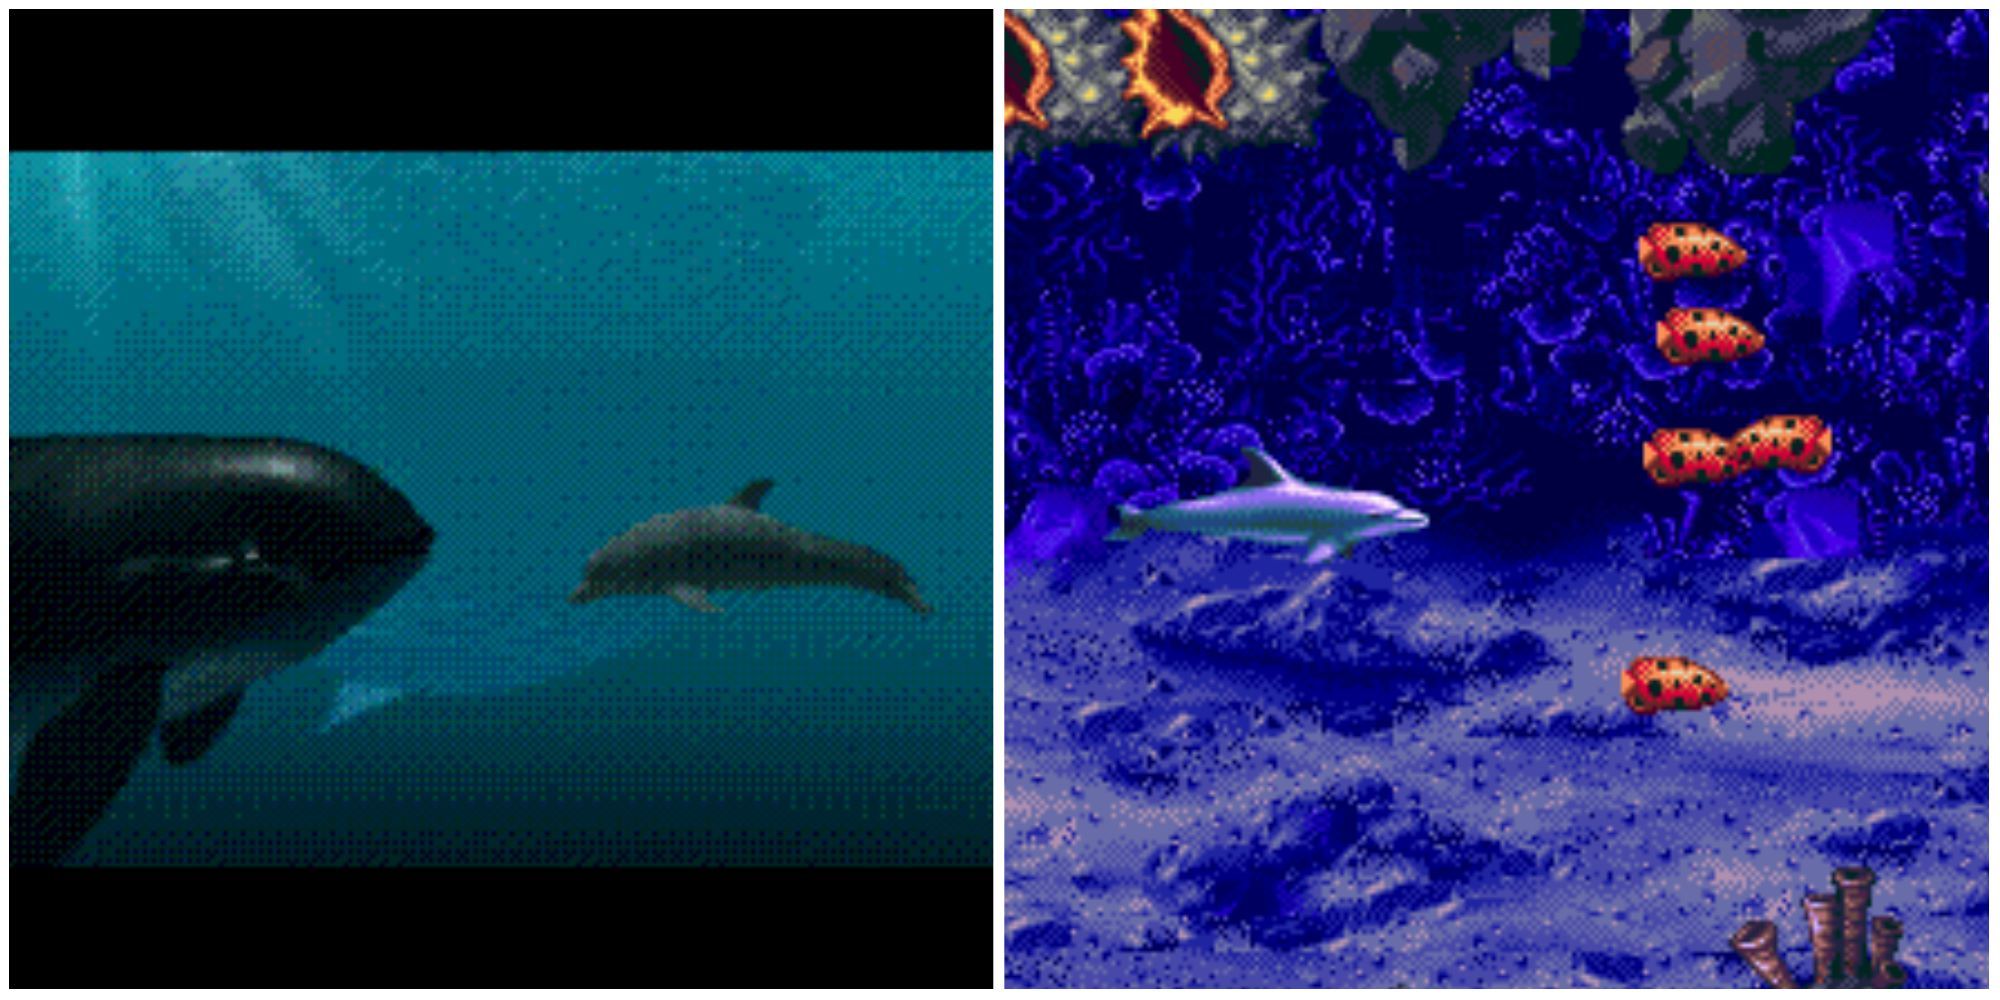 Left - FMV from the game featuring Ecco and a Killer Whale, Right Ecco swimming in front of 5 multicolored fish